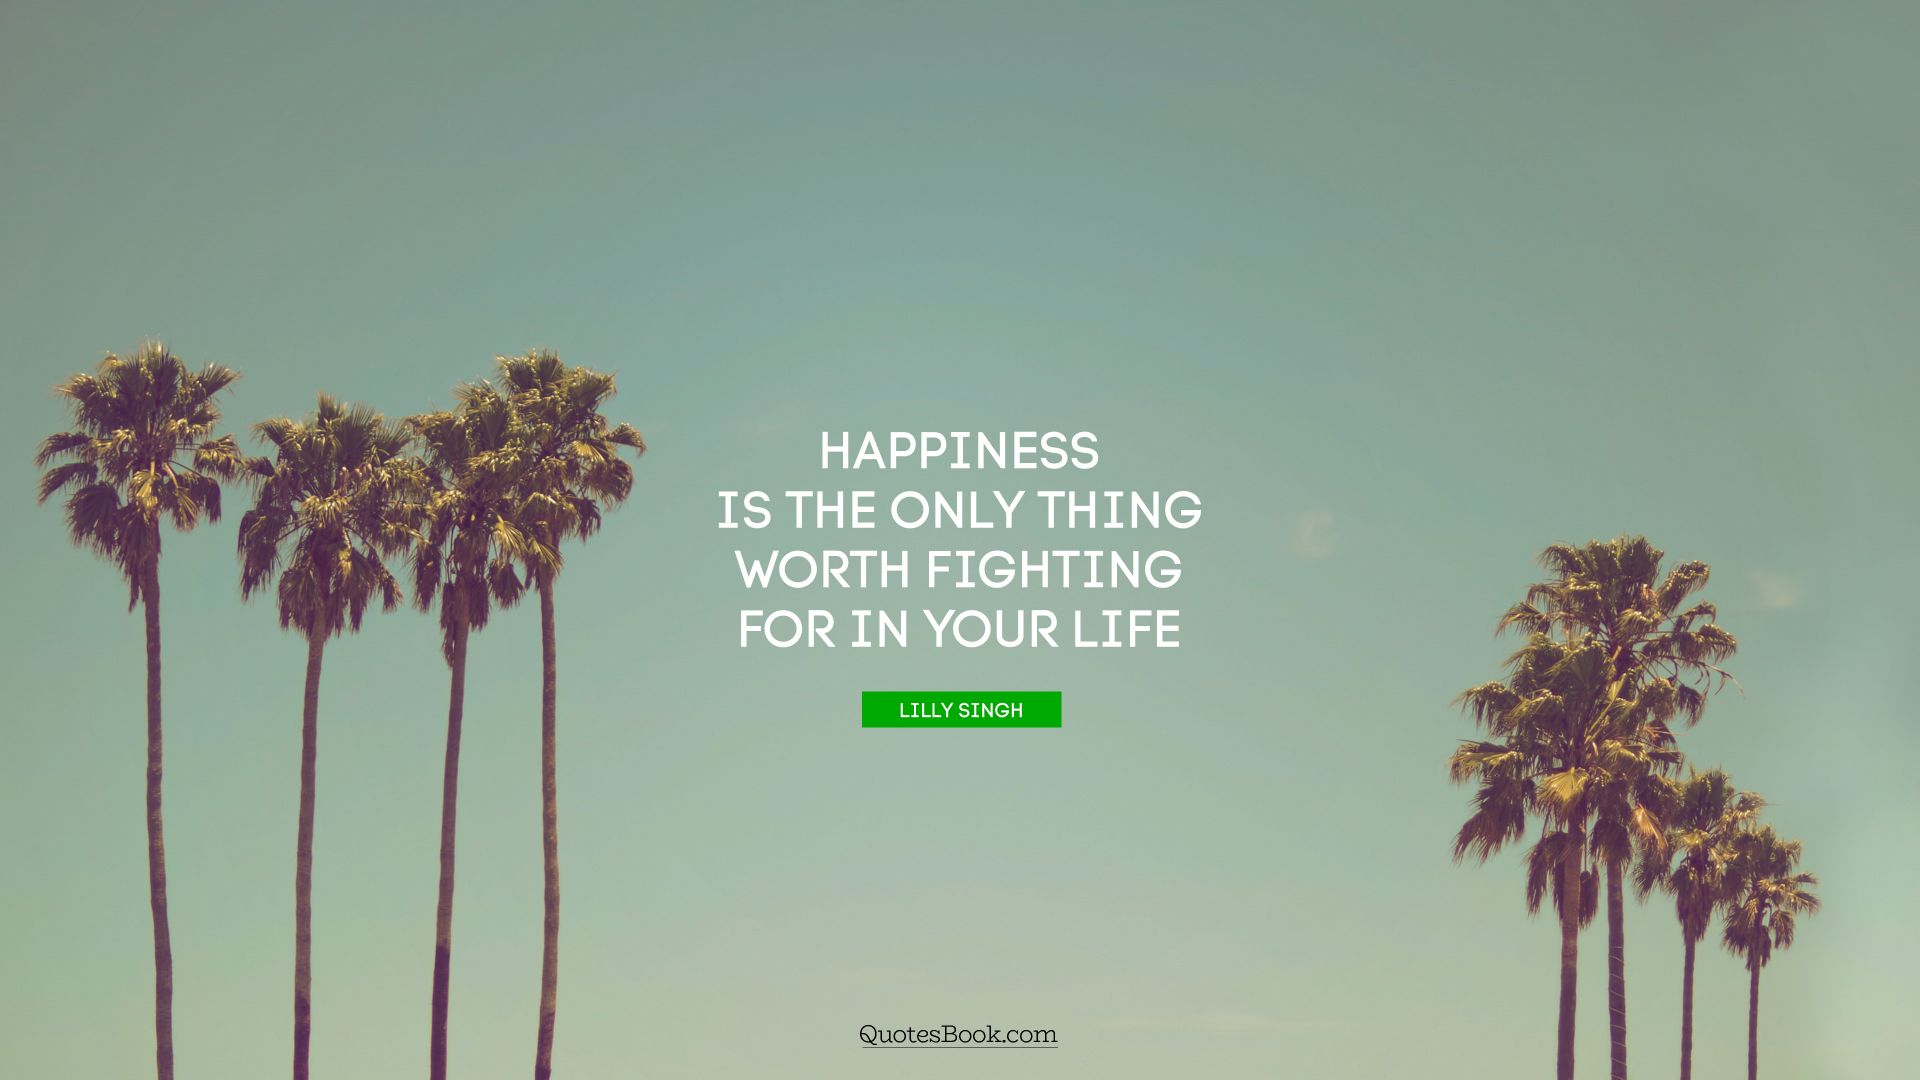 Happiness is the only thing worth fighting for in your life. - Quote by Lilly Singh